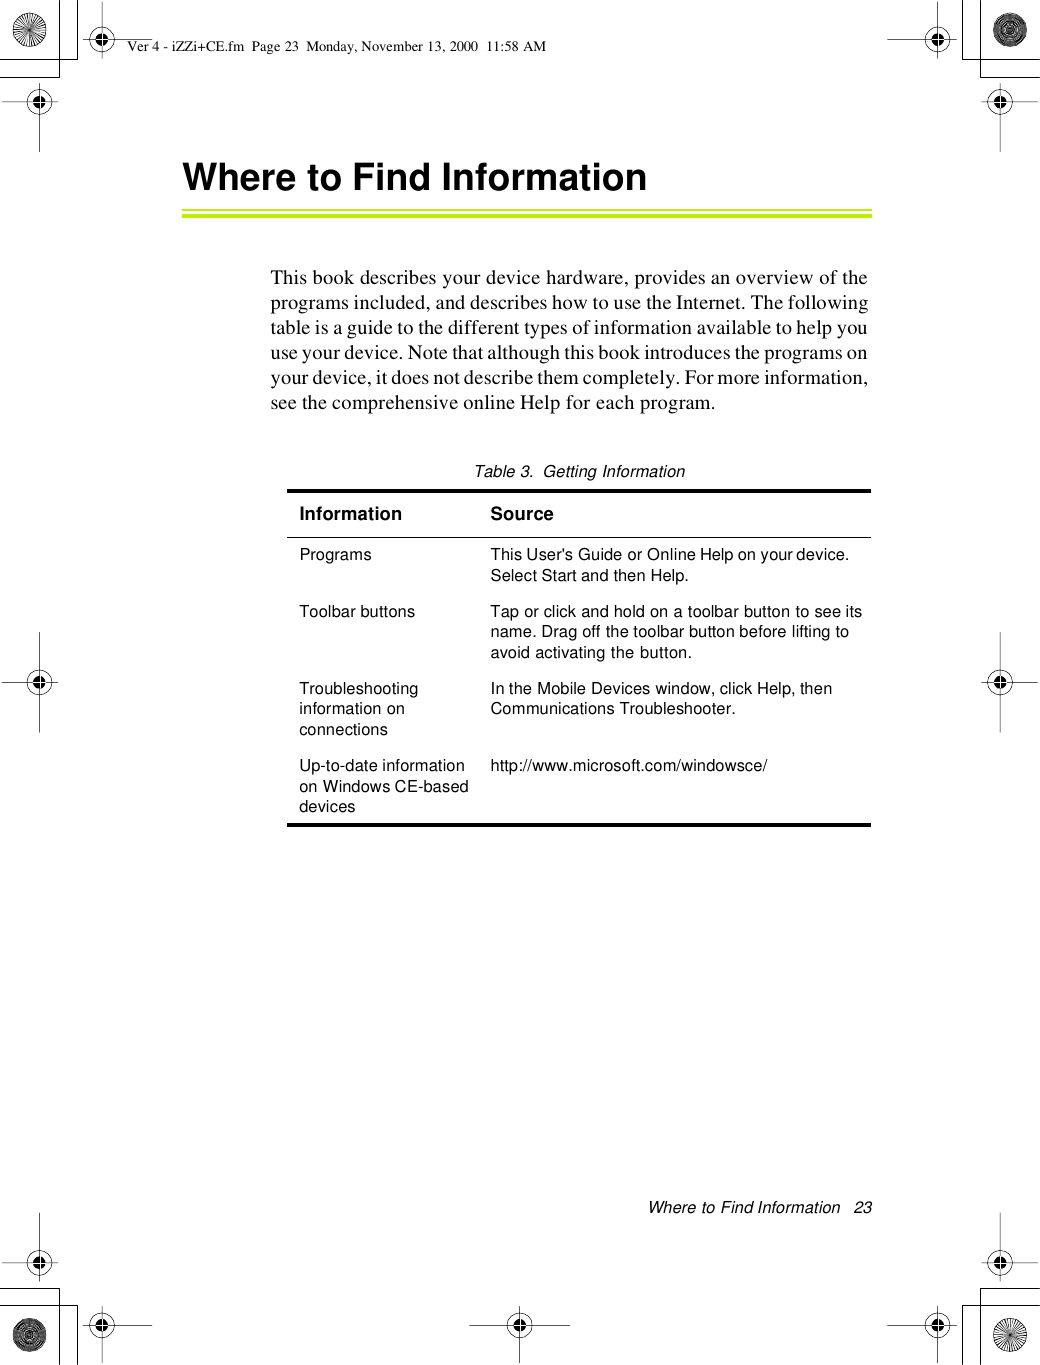 Where to FindInformation 23Where to Find InformationThis book describes your device hardware, provides an overview of theprograms included, and describes how to use the Internet. The followingtable is a guide to the different types of information available to help youuse your device. Note that although this book introduces the programs onyour device, it does not describe them completely. For more information,see the comprehensive online Help for each program.Table3. Getting InformationInformation SourcePrograms This User&apos;s Guide or Online Help on your device.Select Start and then Help.Toolbar buttons Tap or click and hold on a toolbar button to see itsname. Drag off the toolbar button before lifting toavoid activating the button.Troubleshootinginformation onconnectionsIn the Mobile Devices window, click Help, thenCommunications Troubleshooter.Up-to-date informationon Windows CE-baseddeviceshttp://www.microsoft.com/windowsce/Ver 4 - iZZi+CE.fm Page 23 Monday, November 13, 2000 11:58 AM